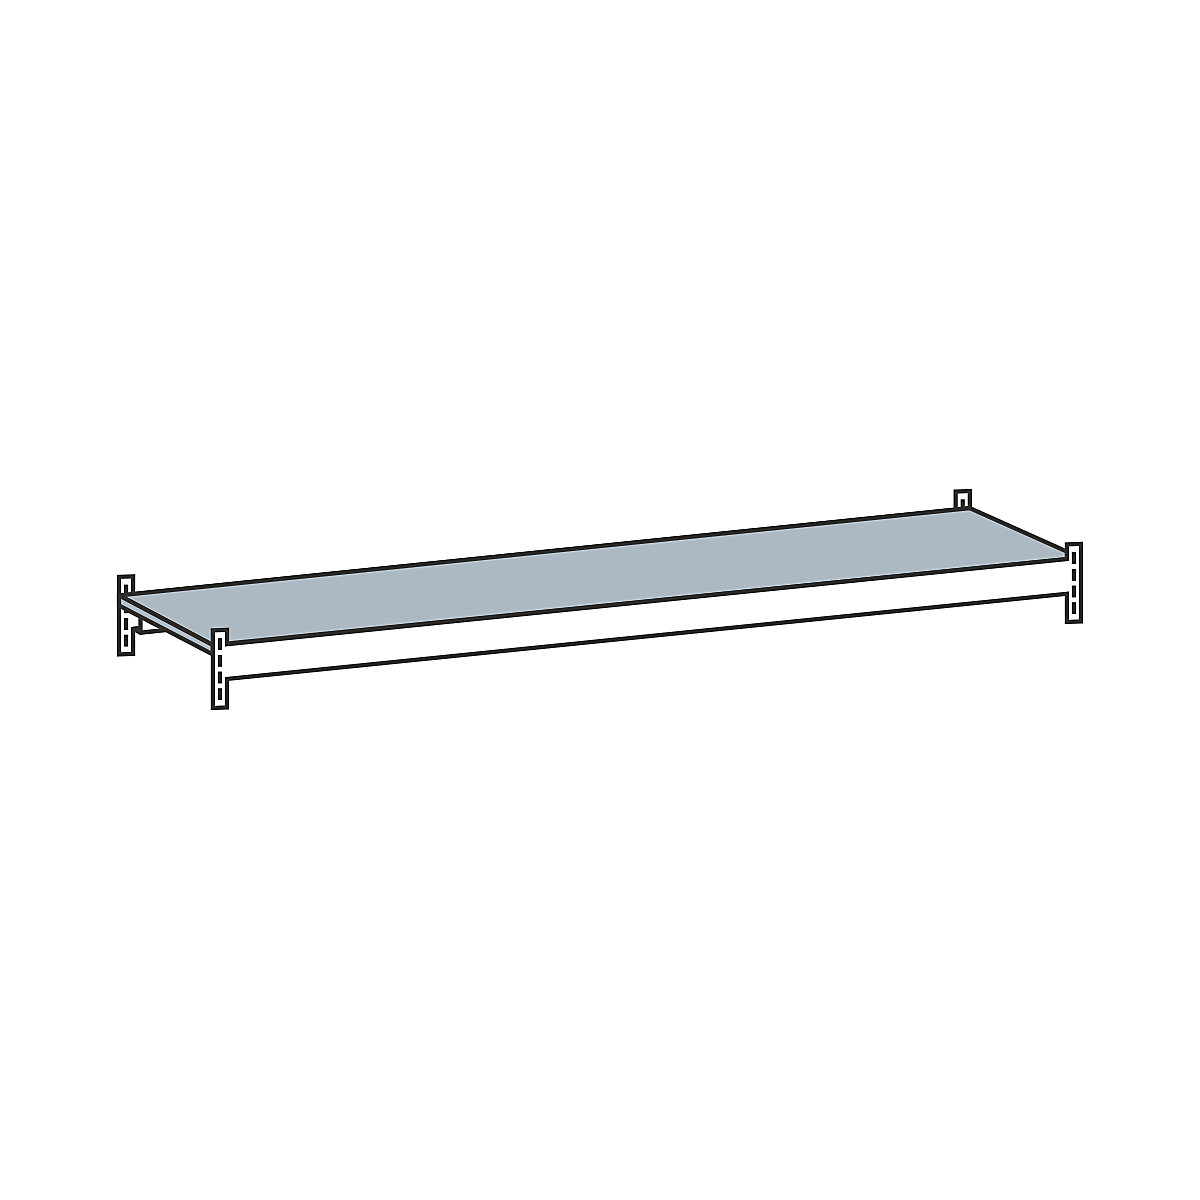 Additional level with steel shelf – SCHULTE